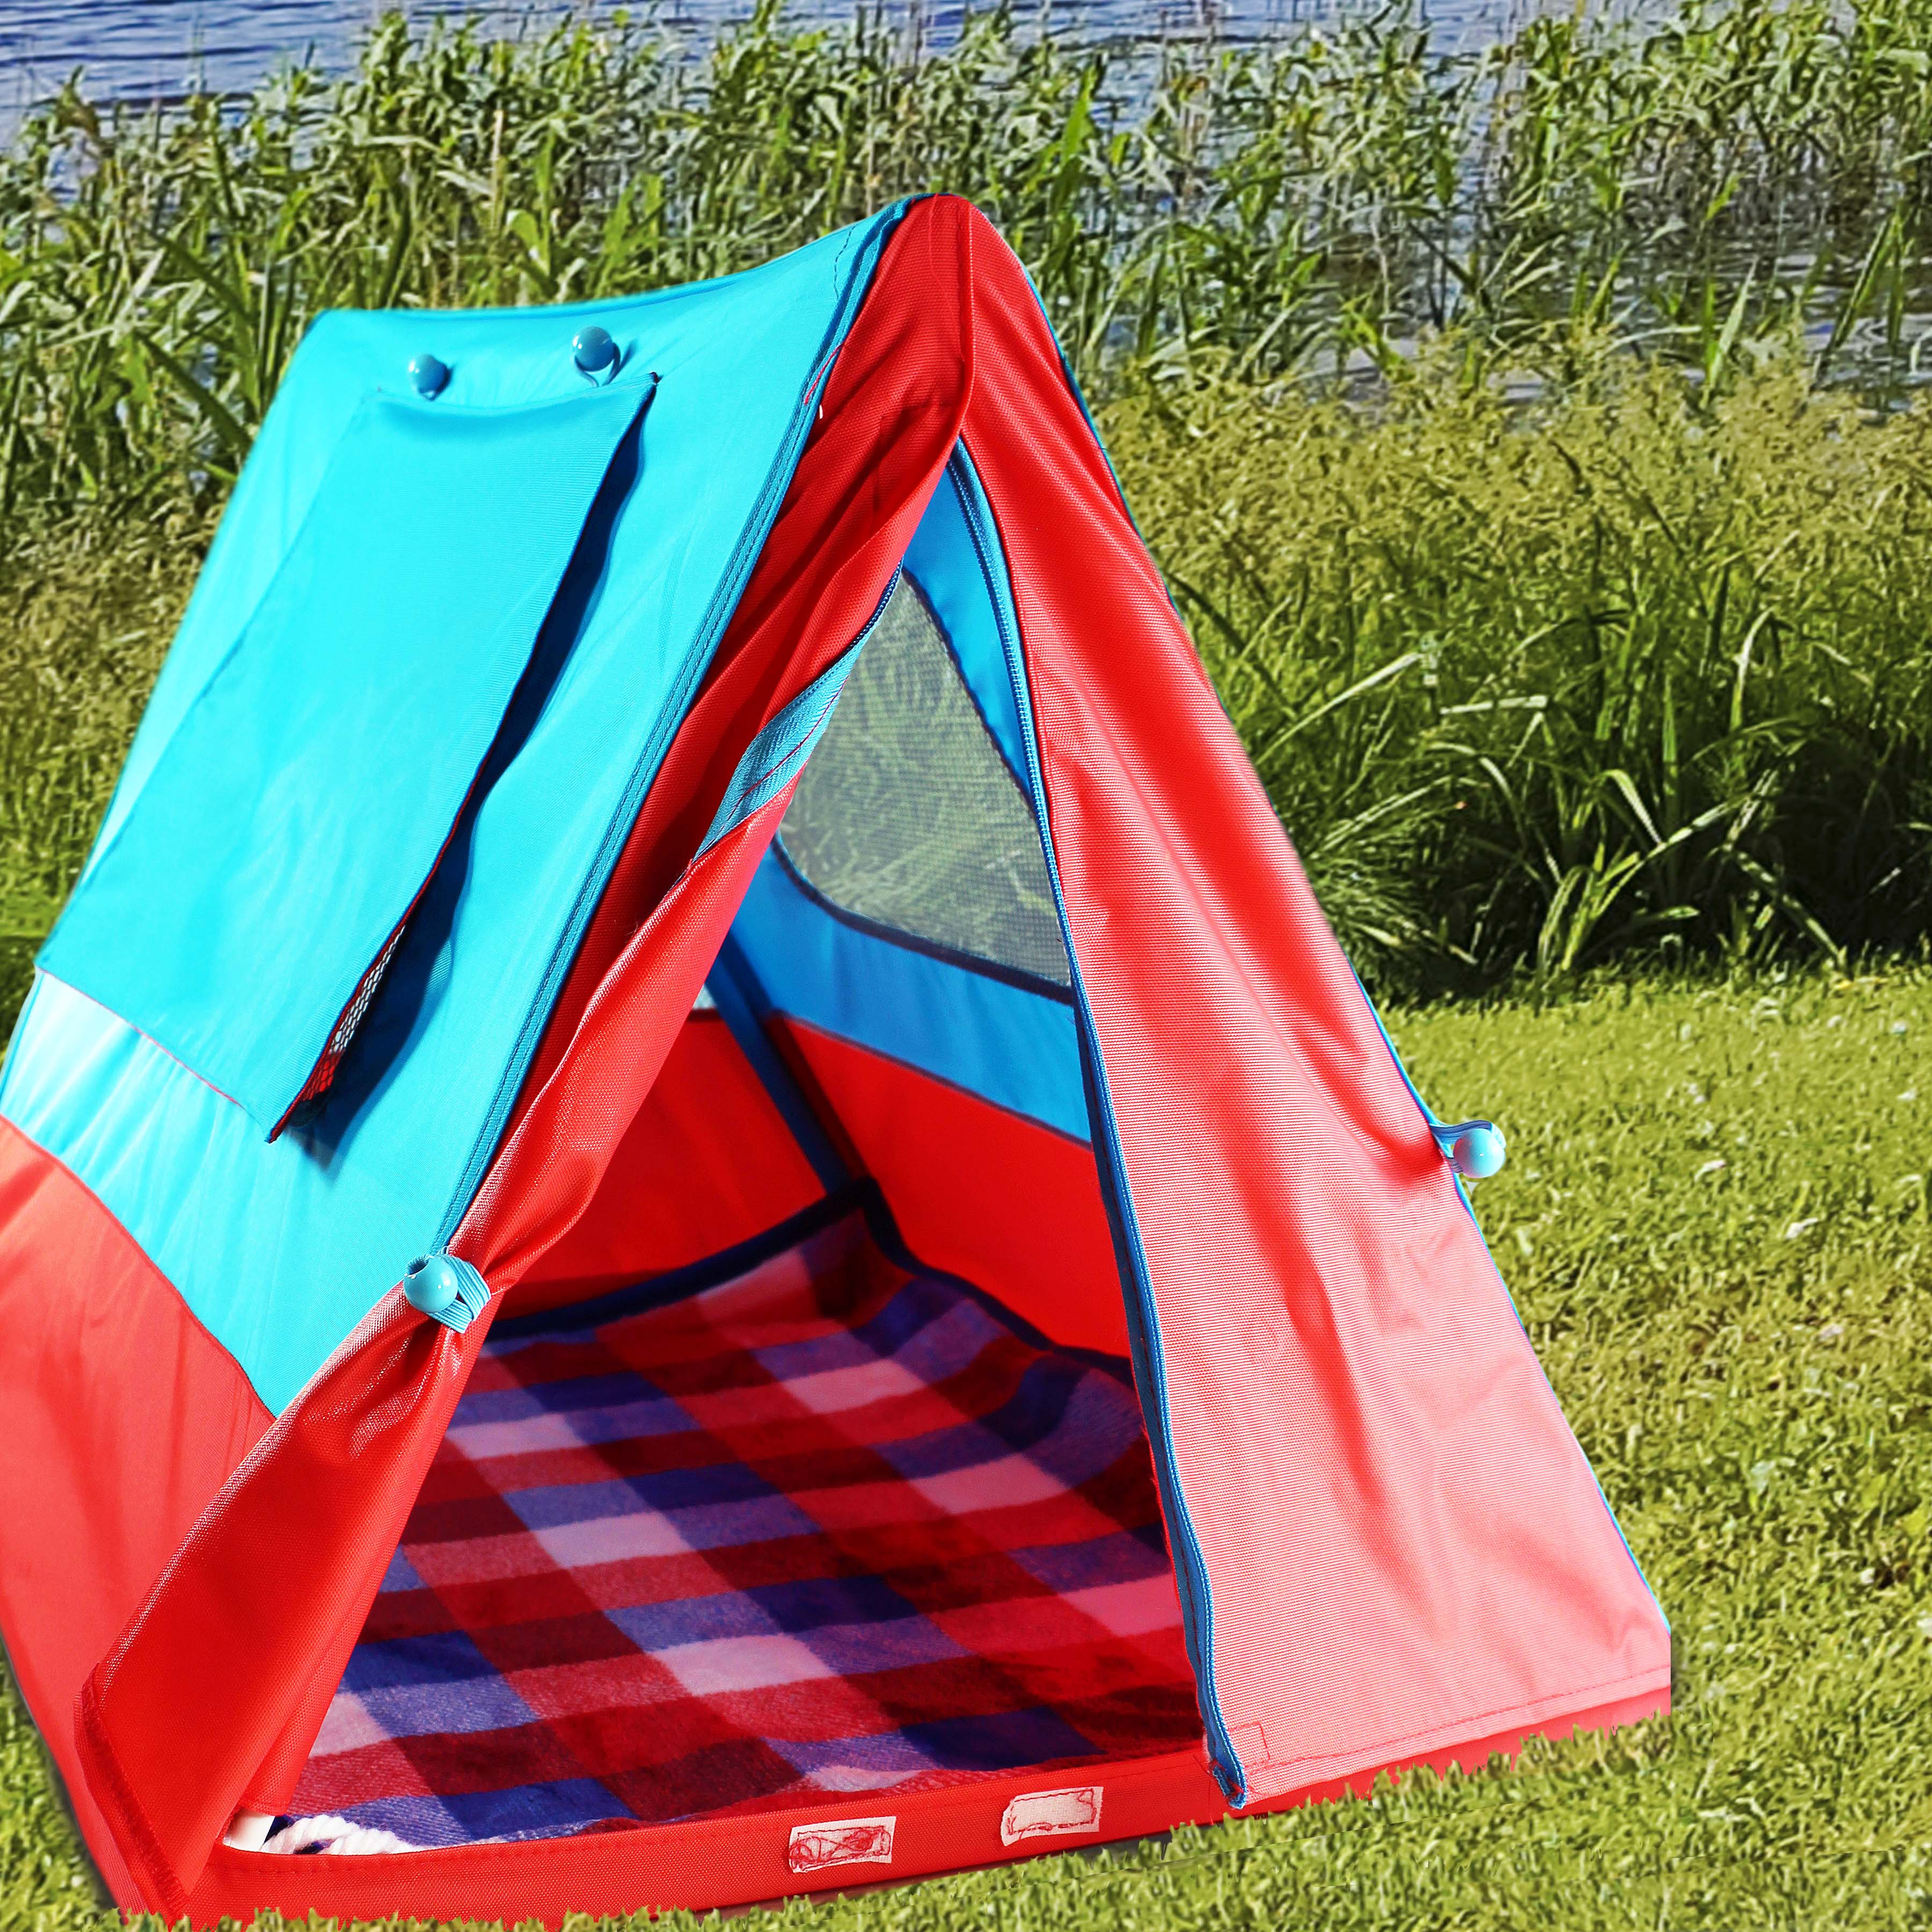 Camping Fun Tent and Sleeping Bags